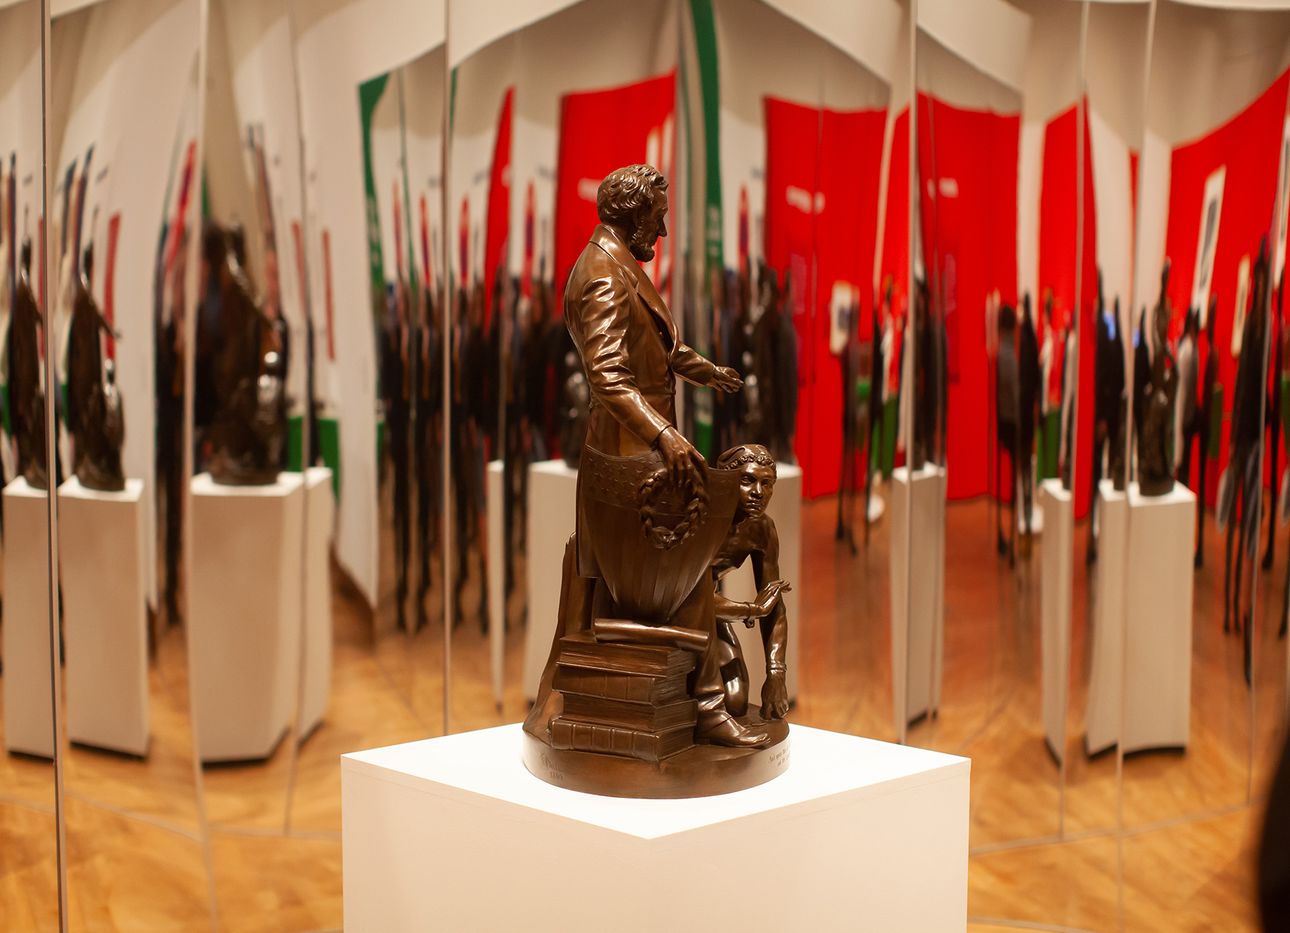 One of three versions of Thomas Ball’s sculpture “Emancipation Group” on view at “re:mancipation.” (Courtesy the Chazen Museum of Art and the Colby College Museum of Art)